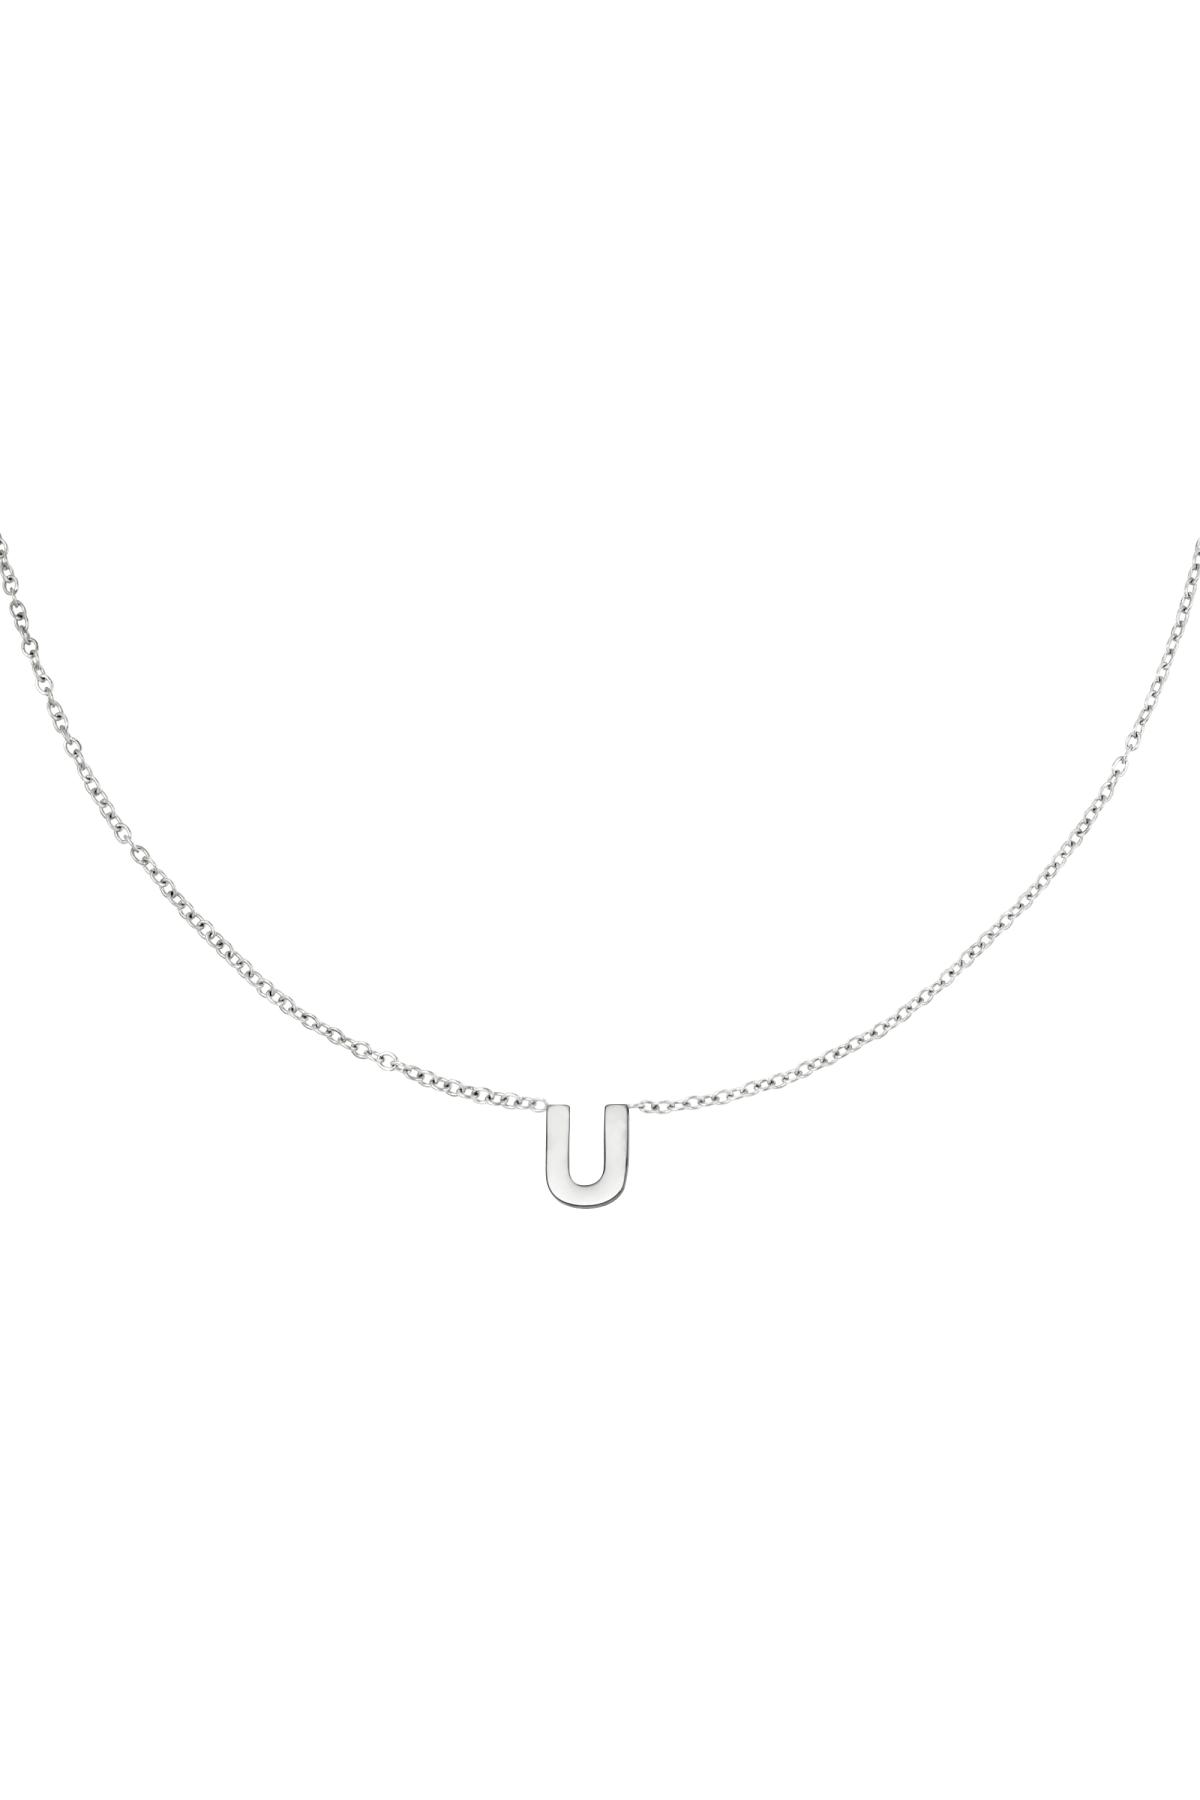 Silver / Stainless steel necklace initial U Silver Picture19